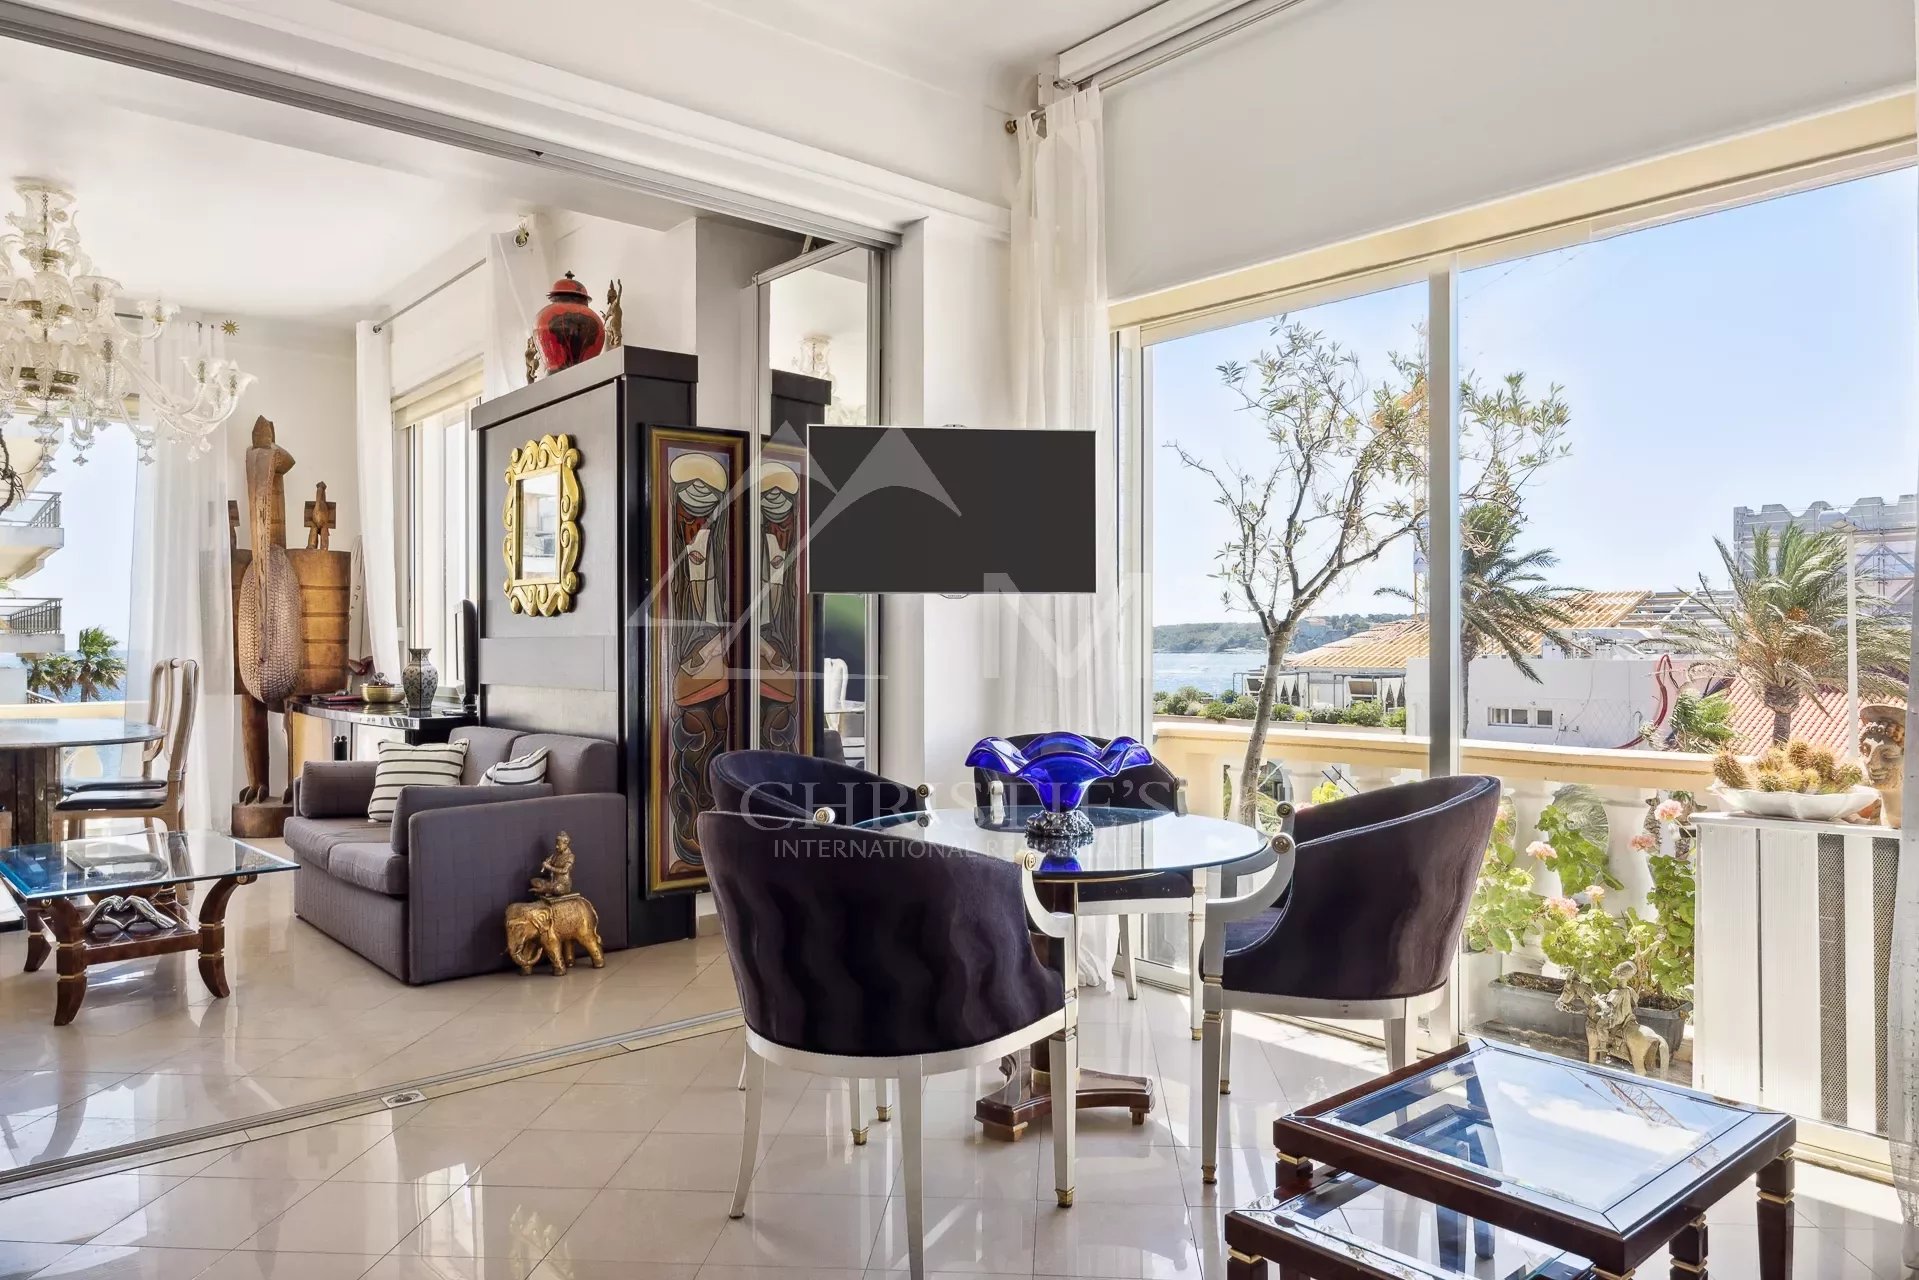 CANNES PALM BEACH - APARTMENT WITH SEA VIEW